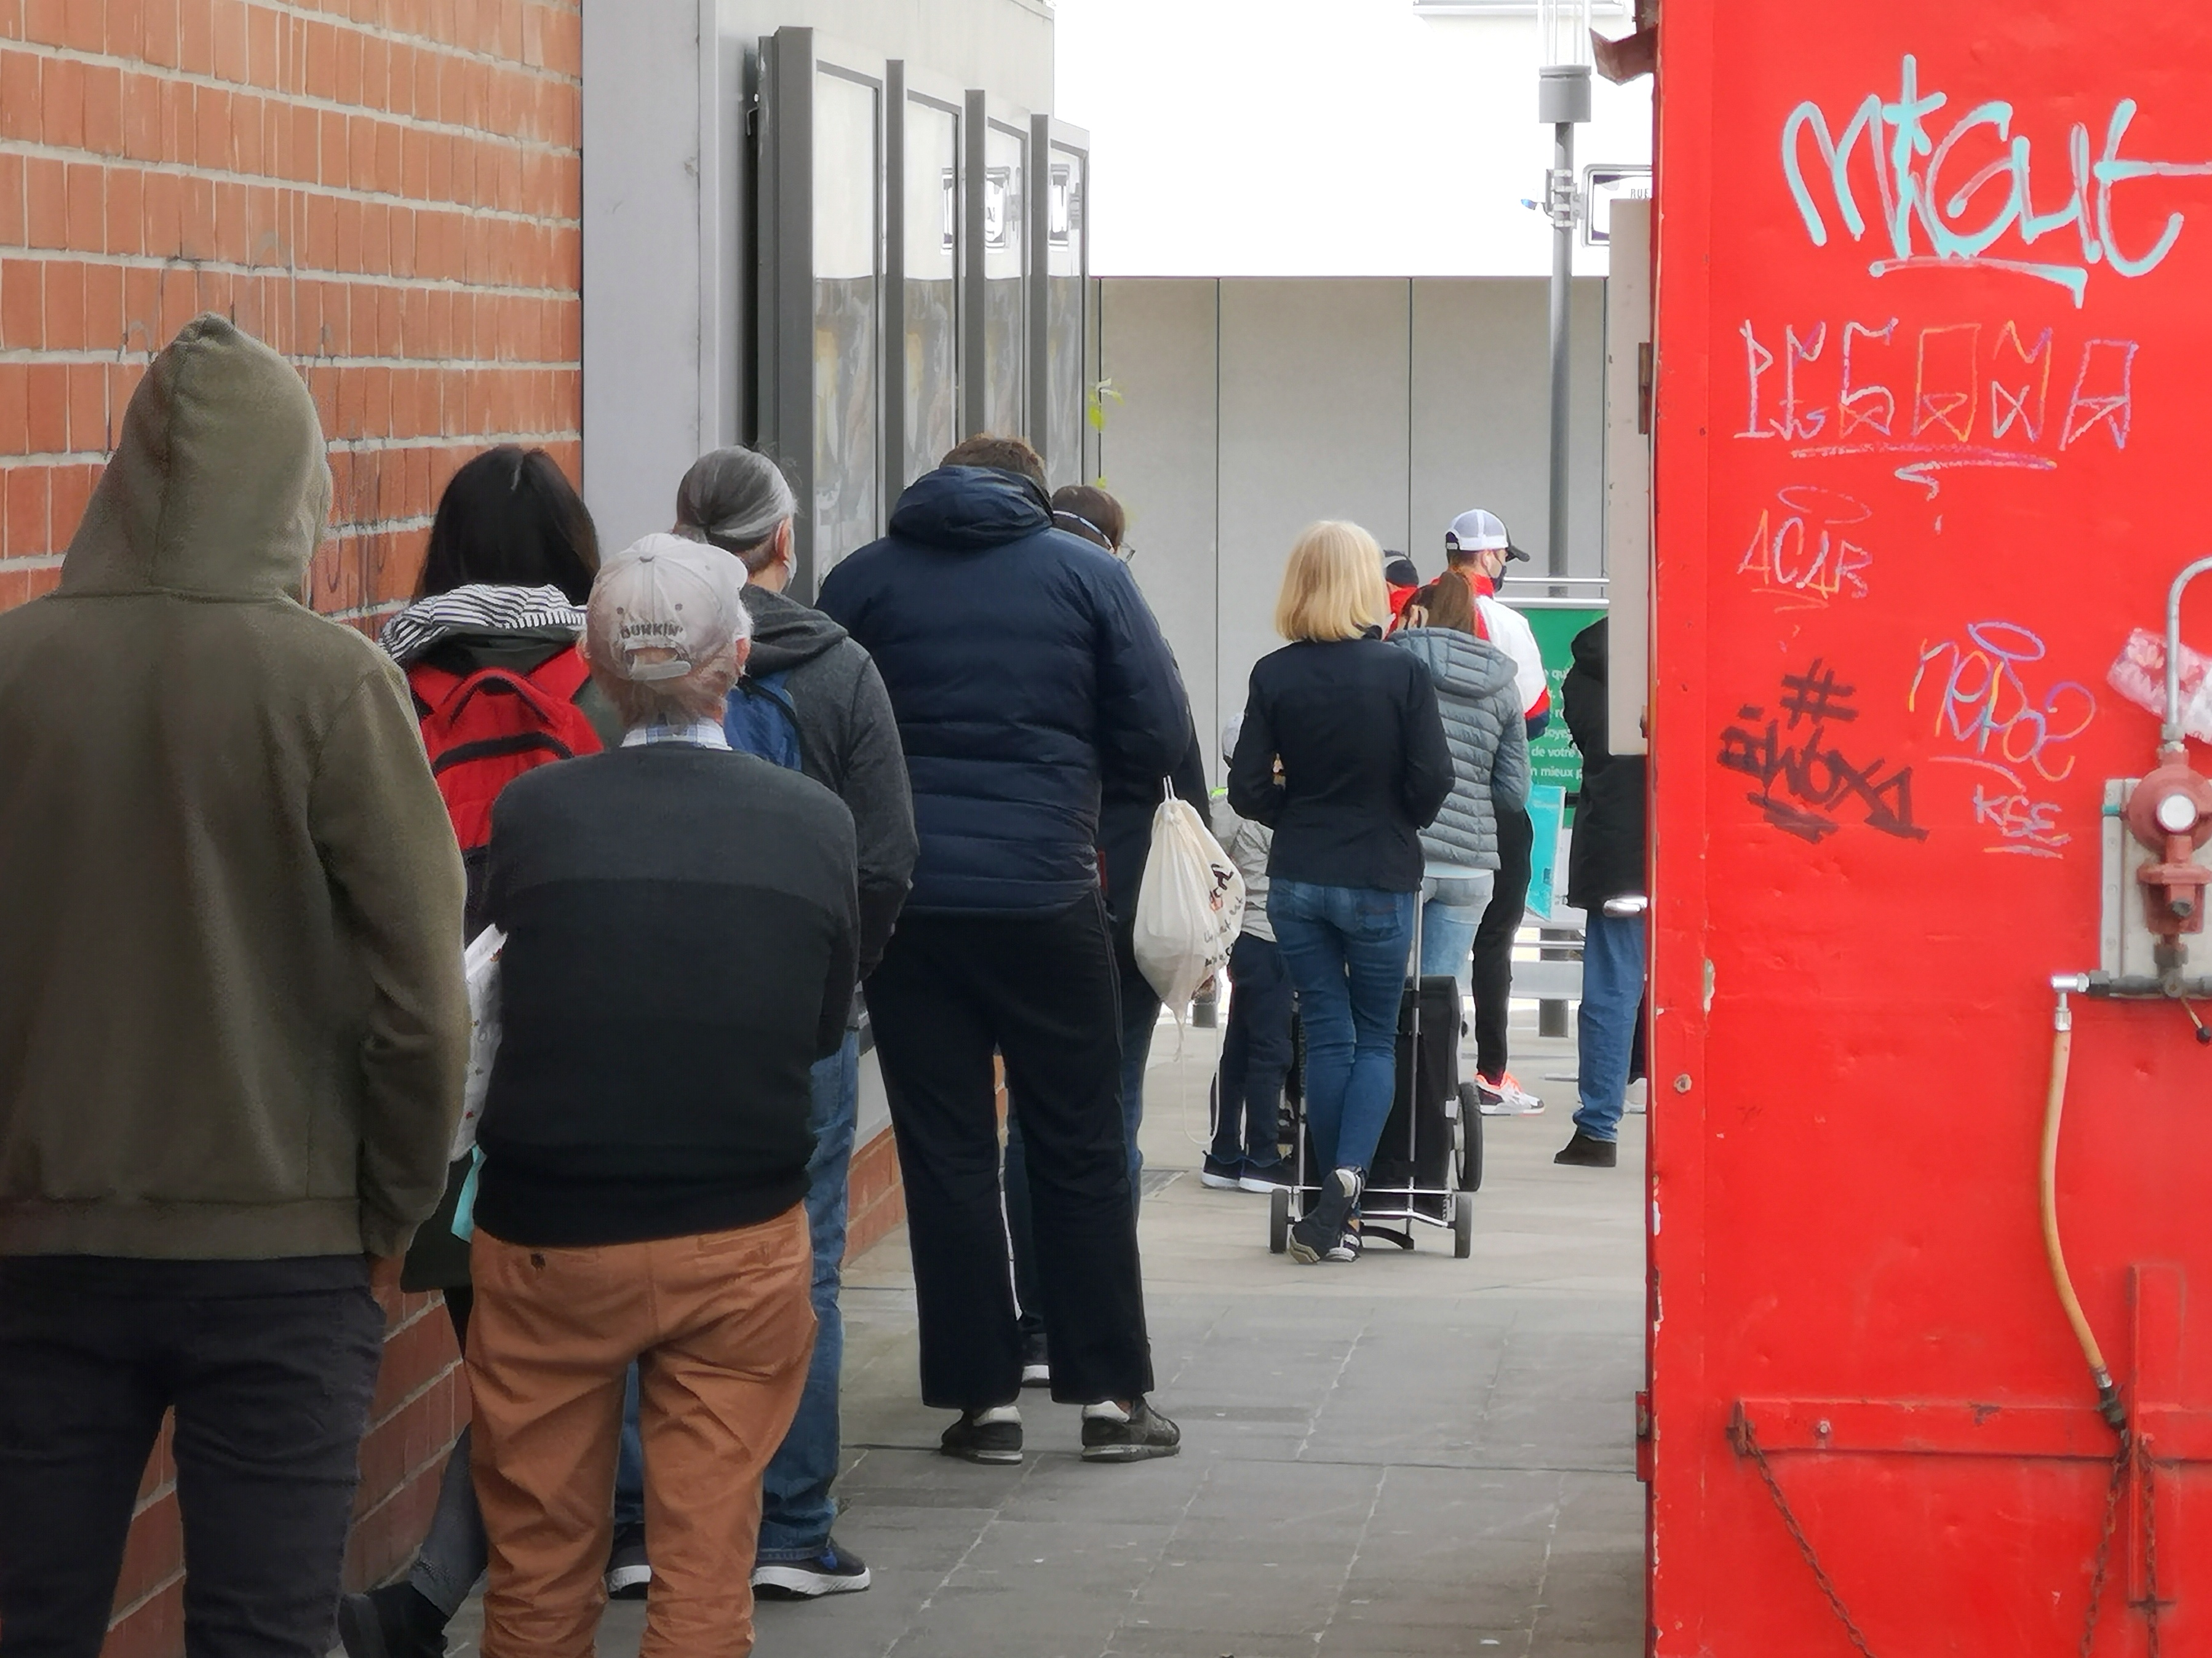 Figure 1: Waiting in line due to supermarket entry restrictions in
                        Luxembourg. Photo: Christian Wille 2020